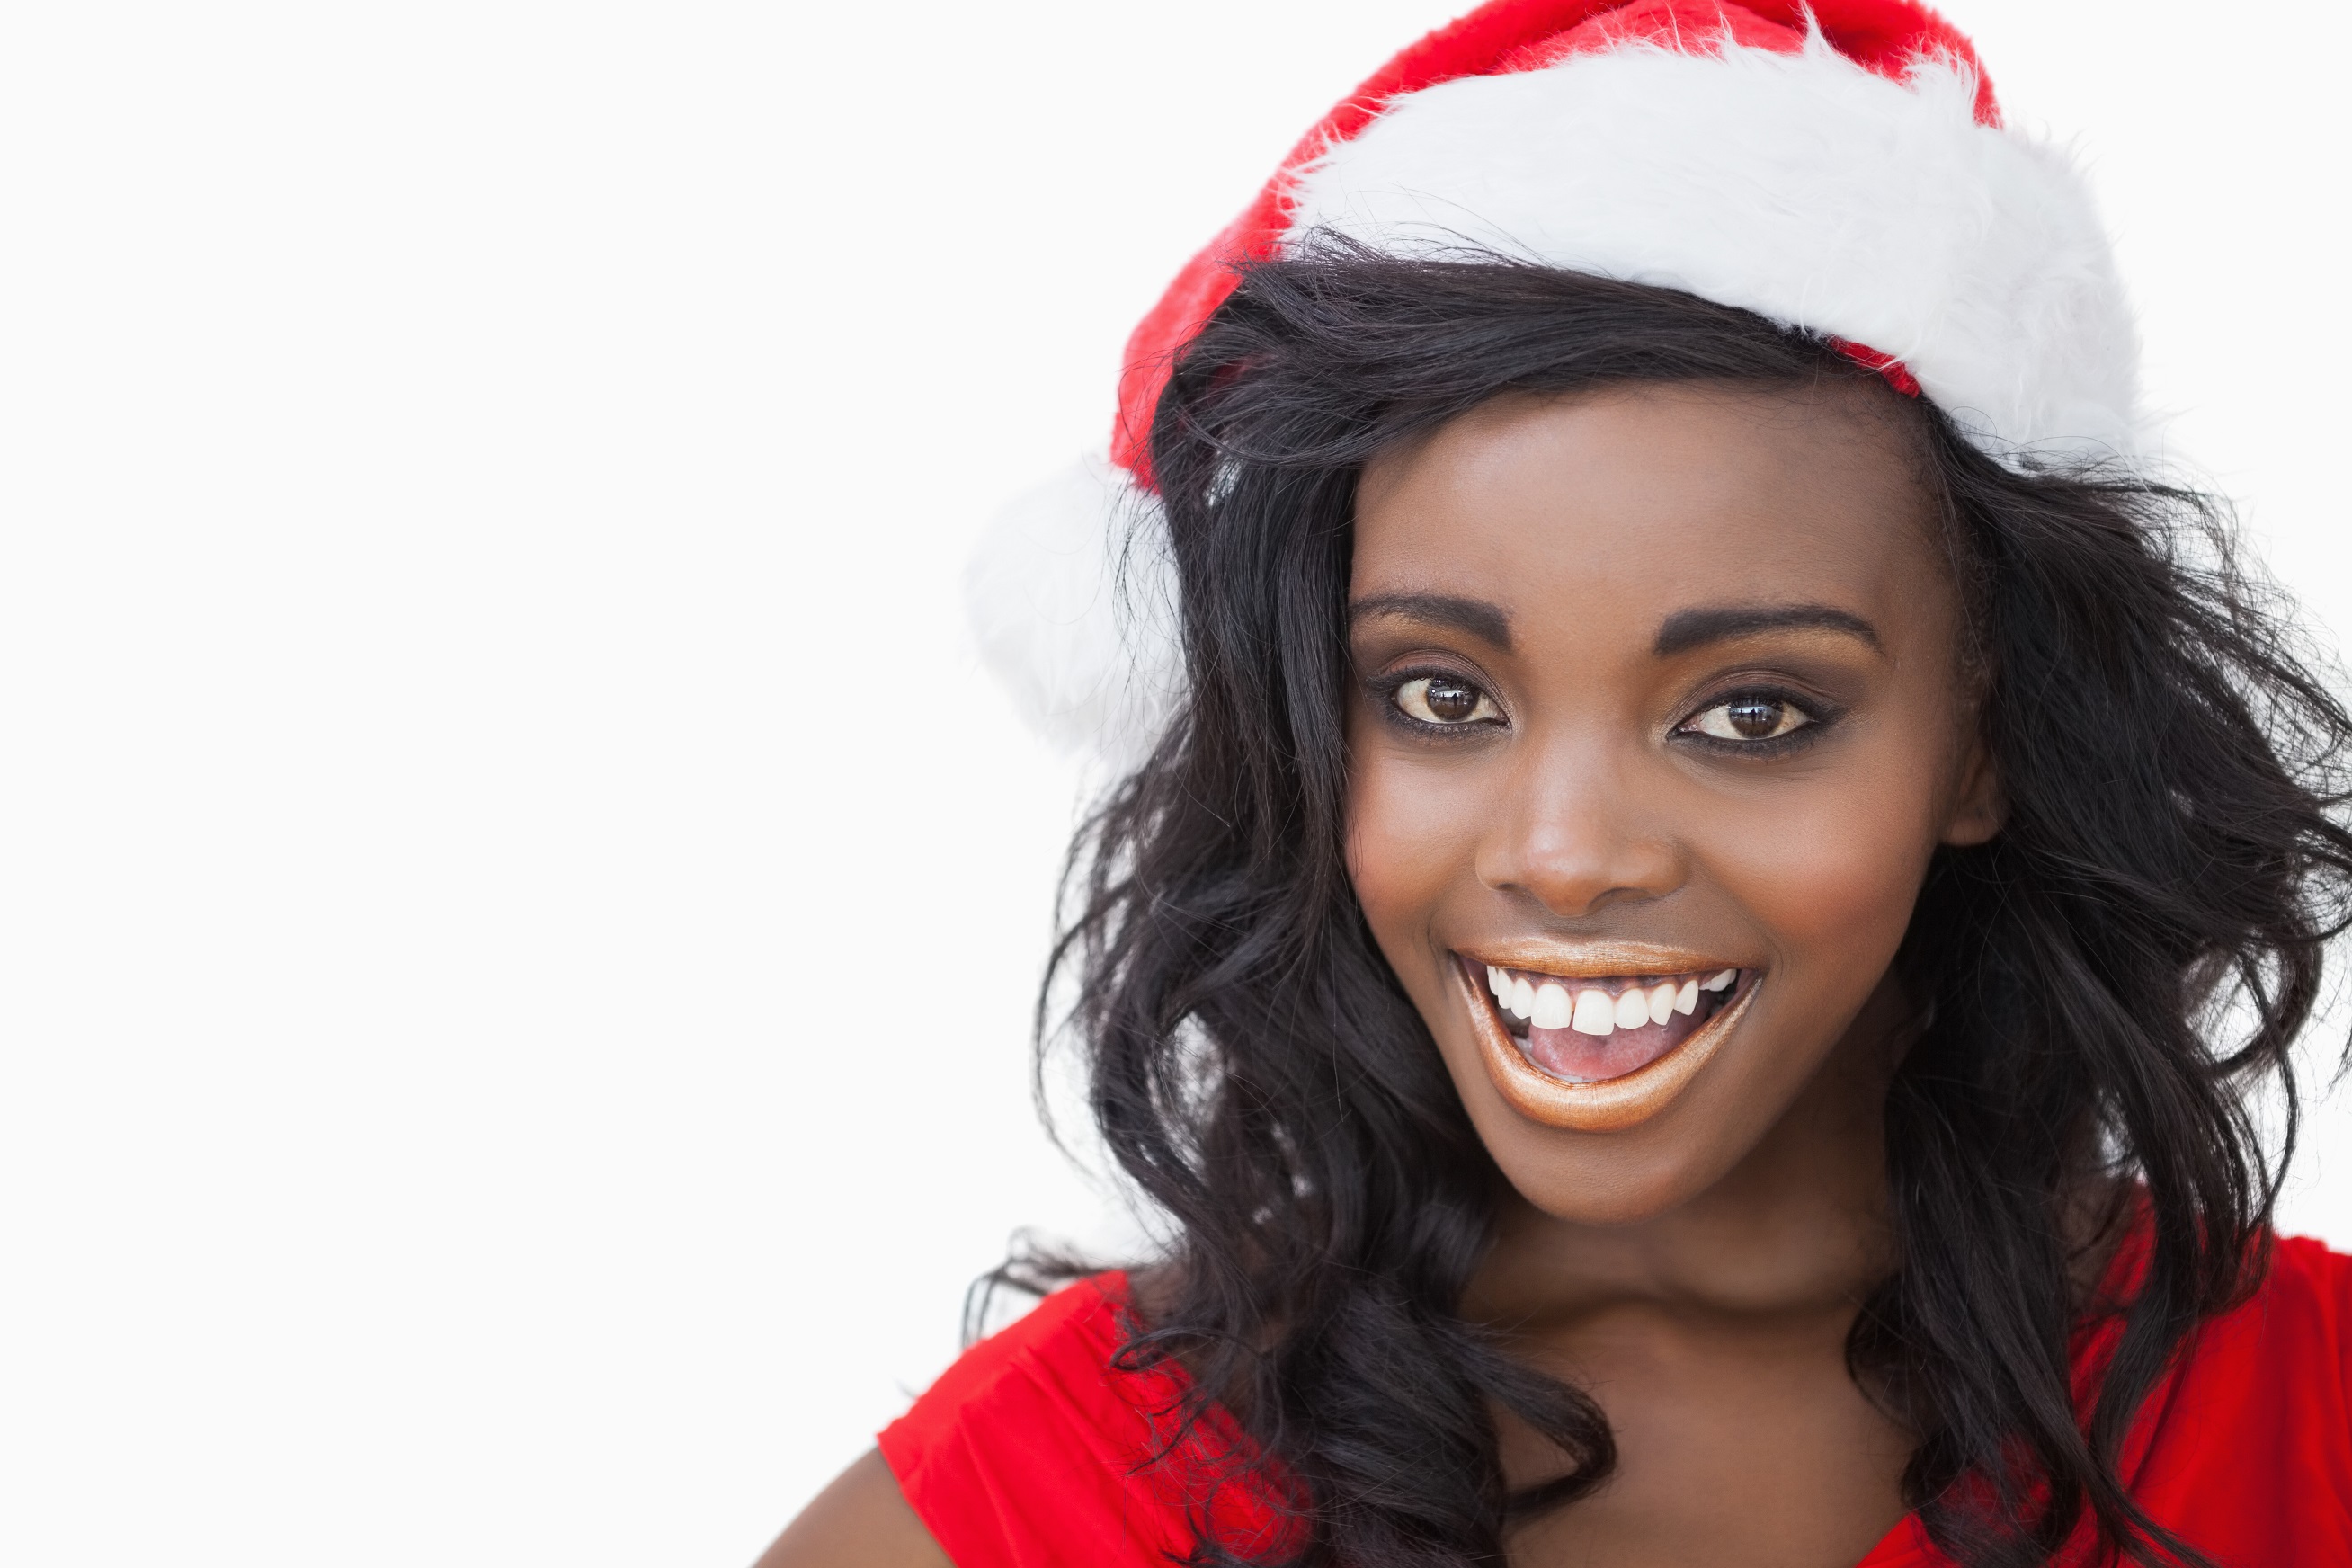 Argan Oil Hair Can Make You Stand Out at the Holiday Party